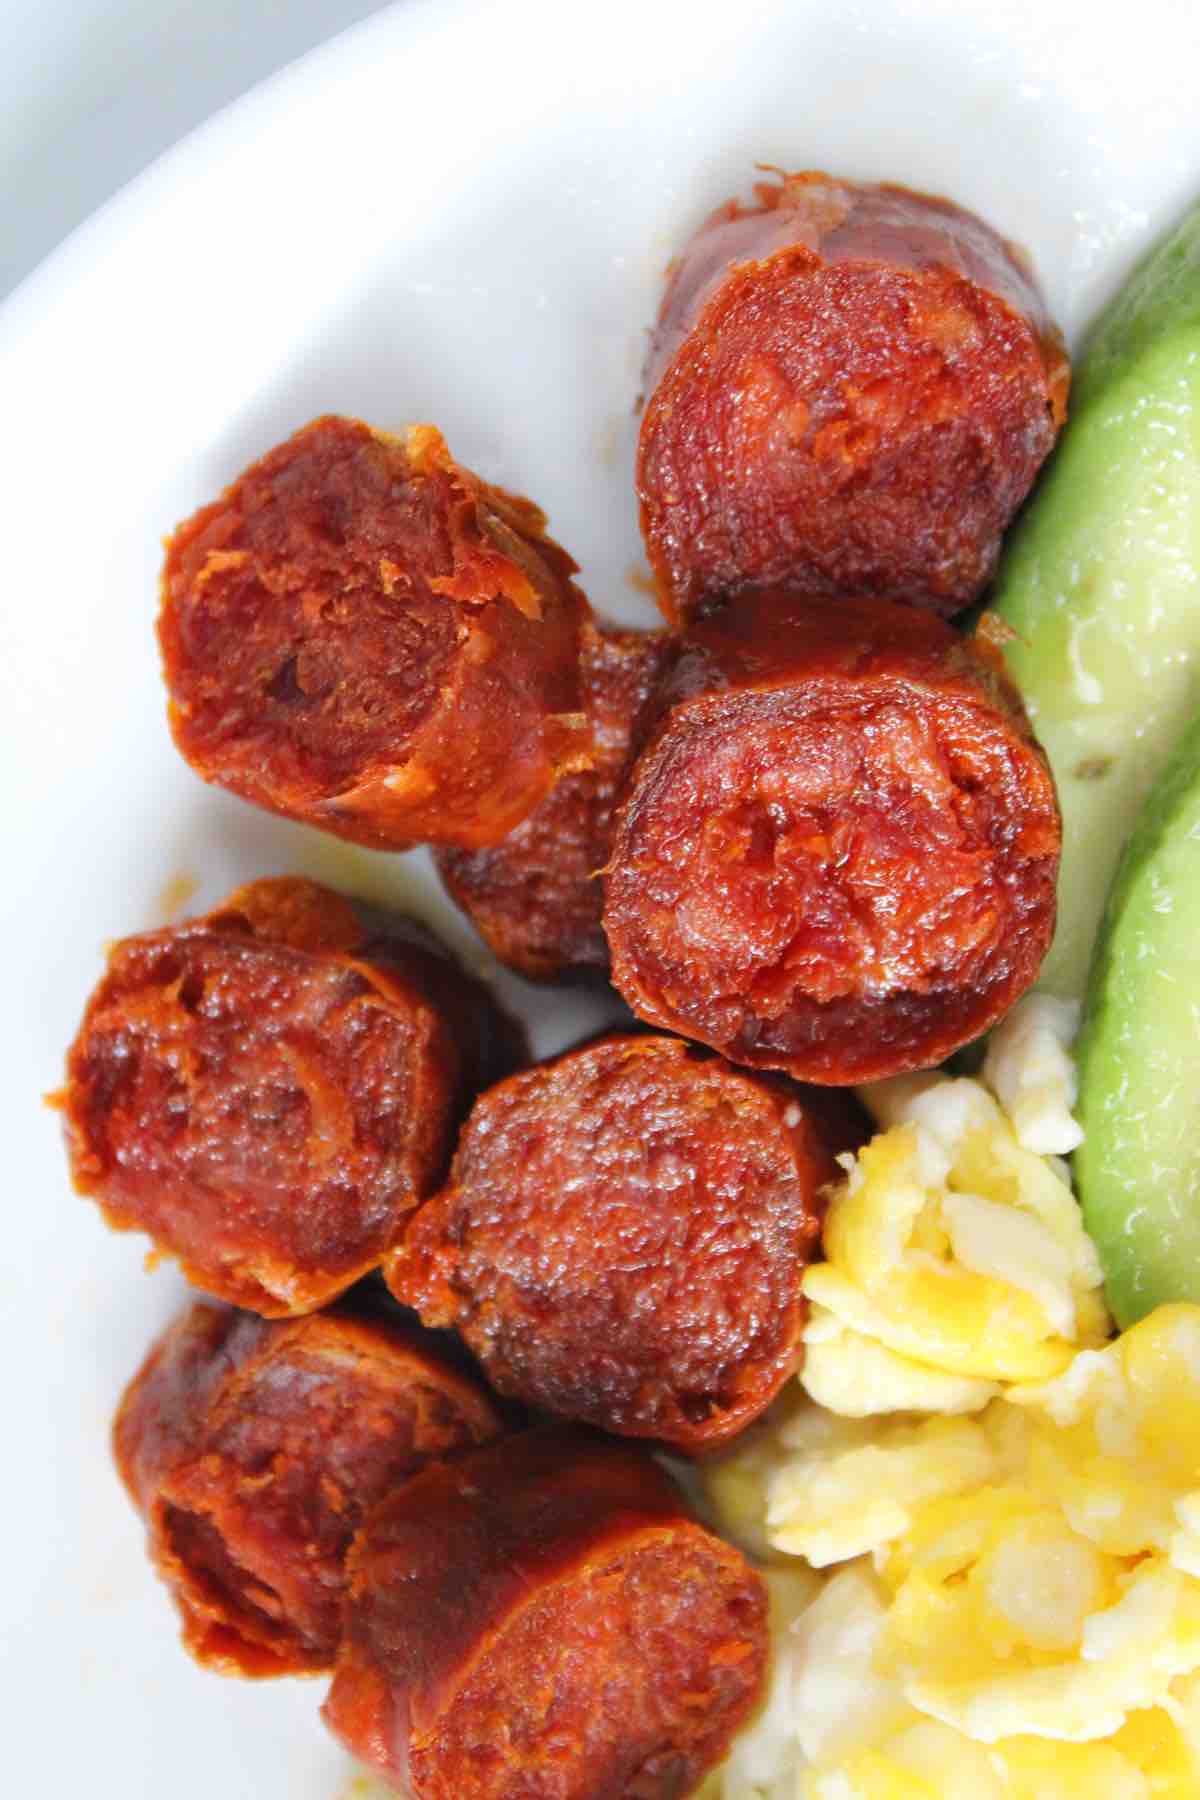 Mexican or Spanish chorizo is perfectly cooked in the air fryer.